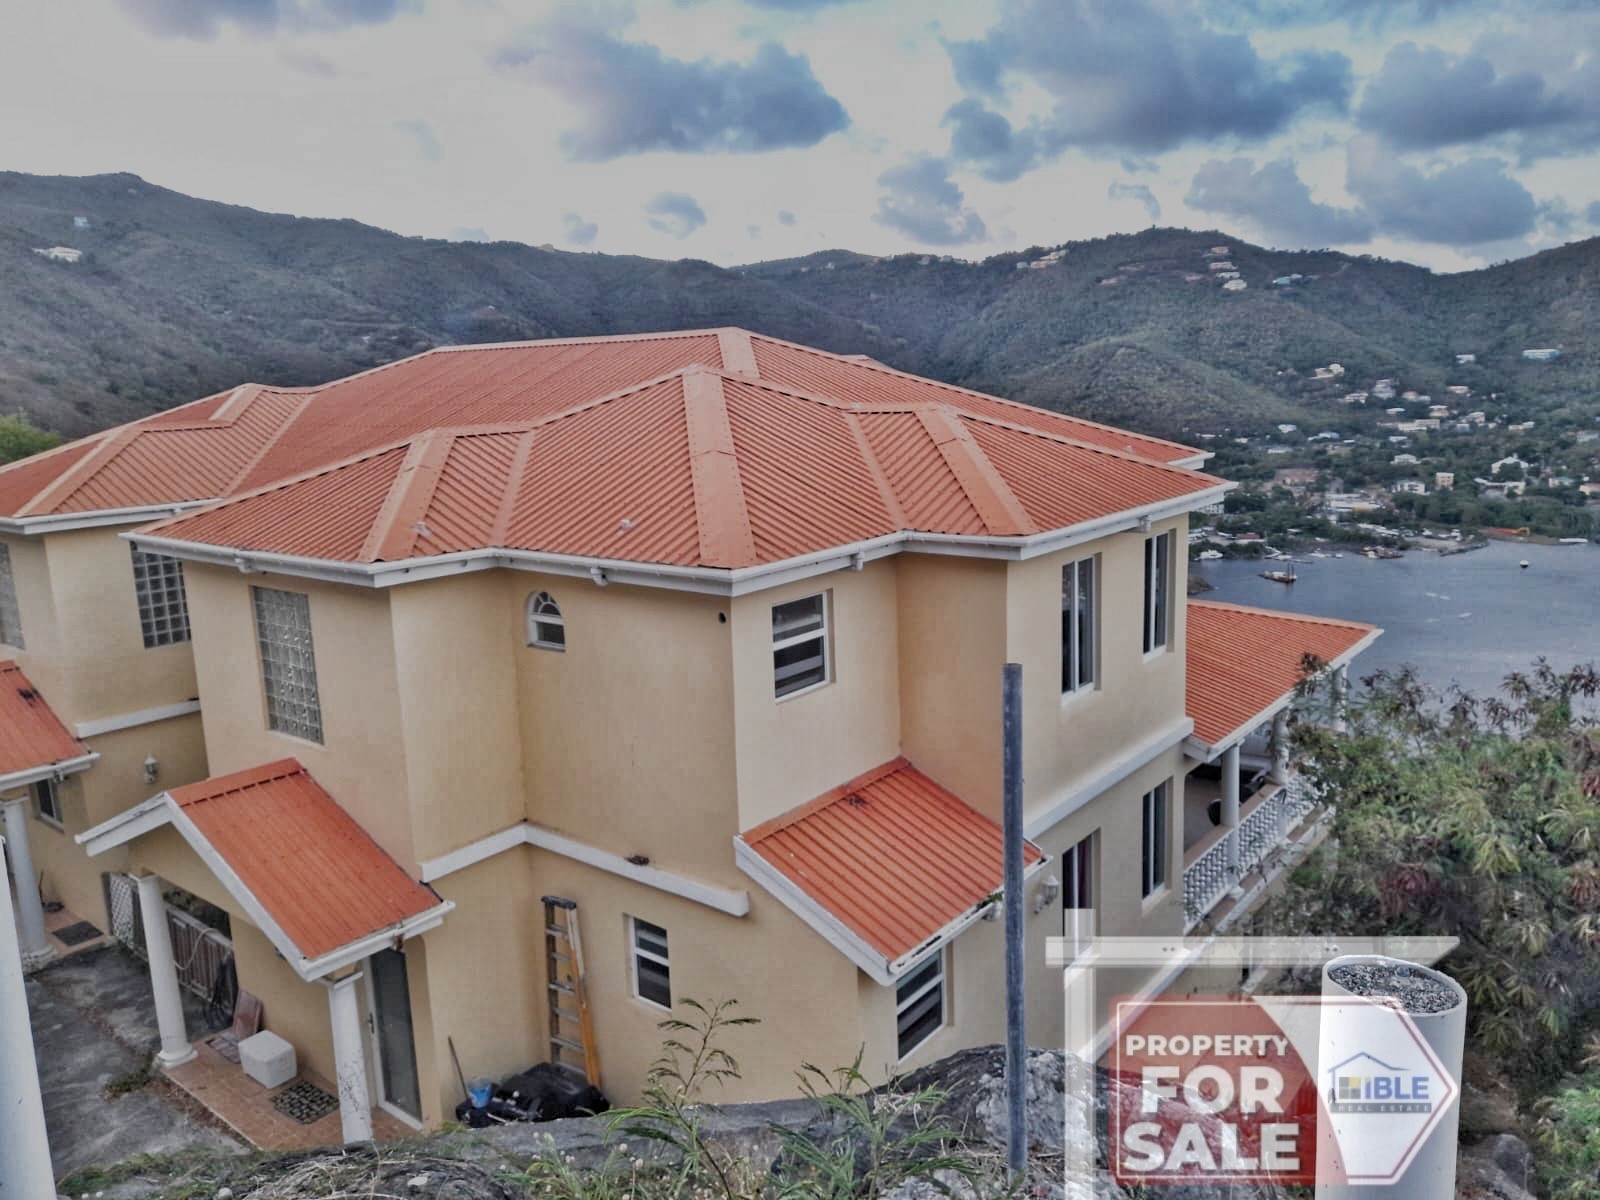 Sea Cows Bay Tortola house for sale